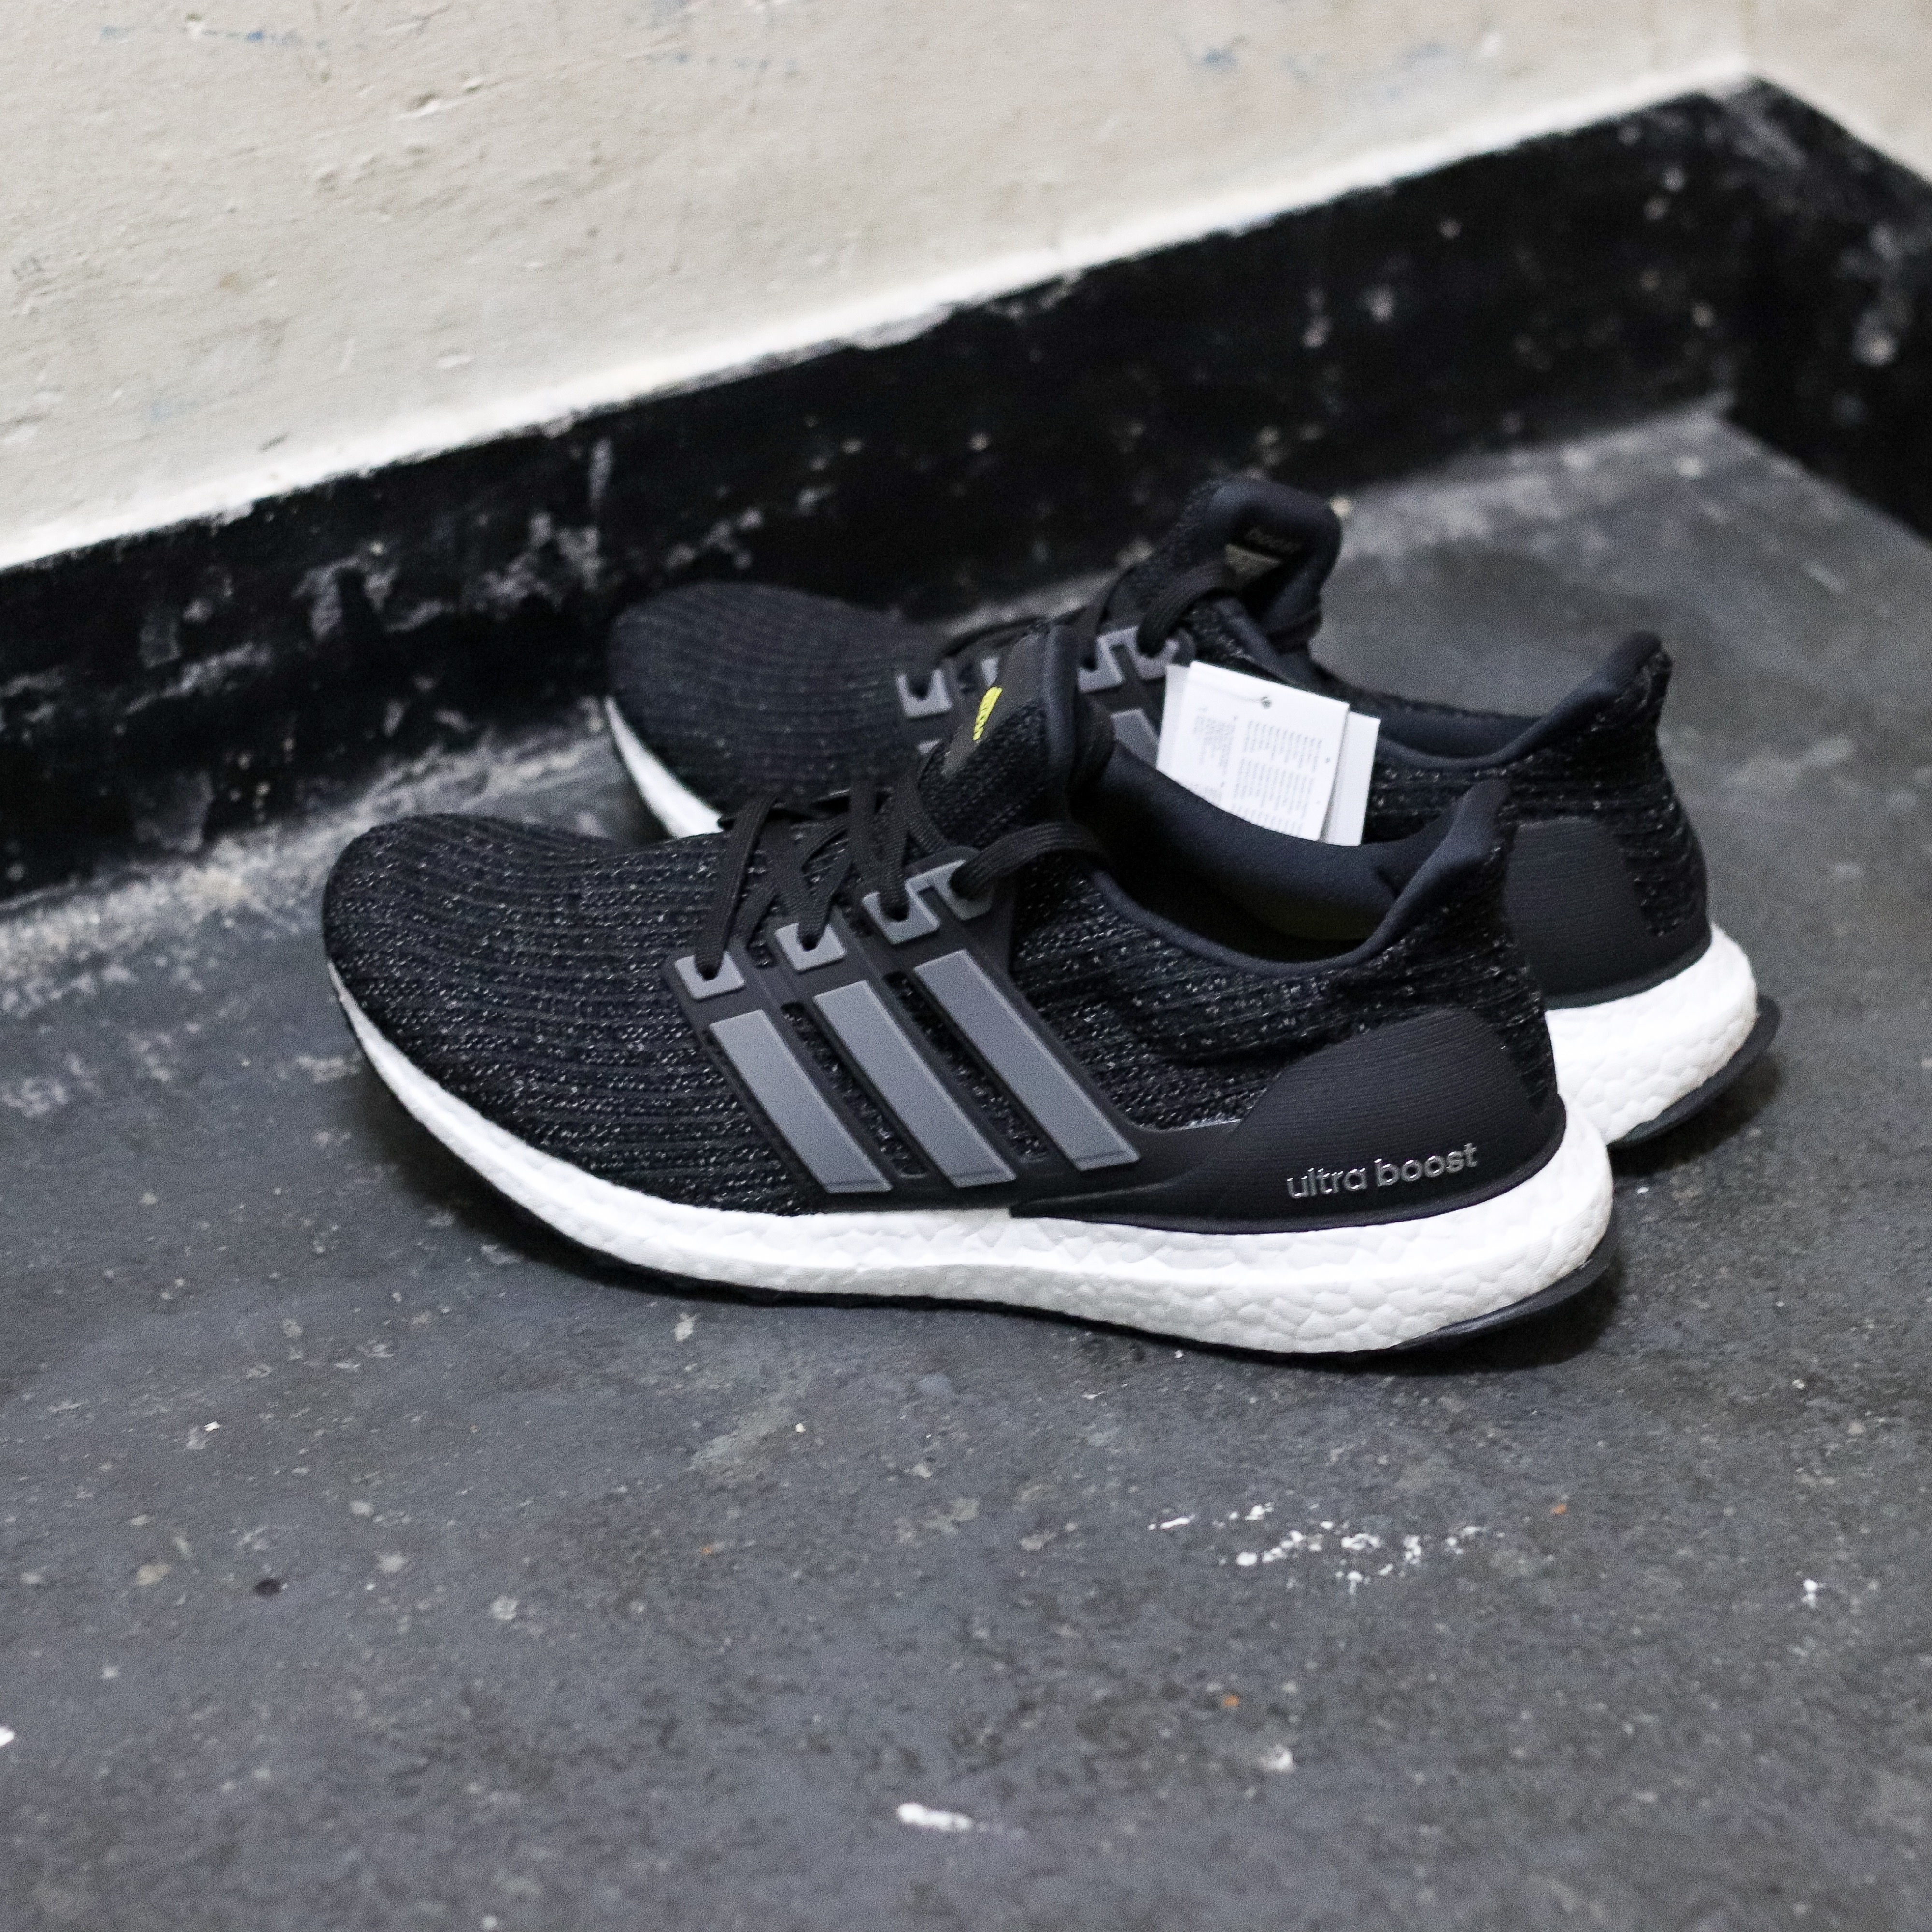 adidas Takes Their Ultraboost 2.0 City Series To Asia With